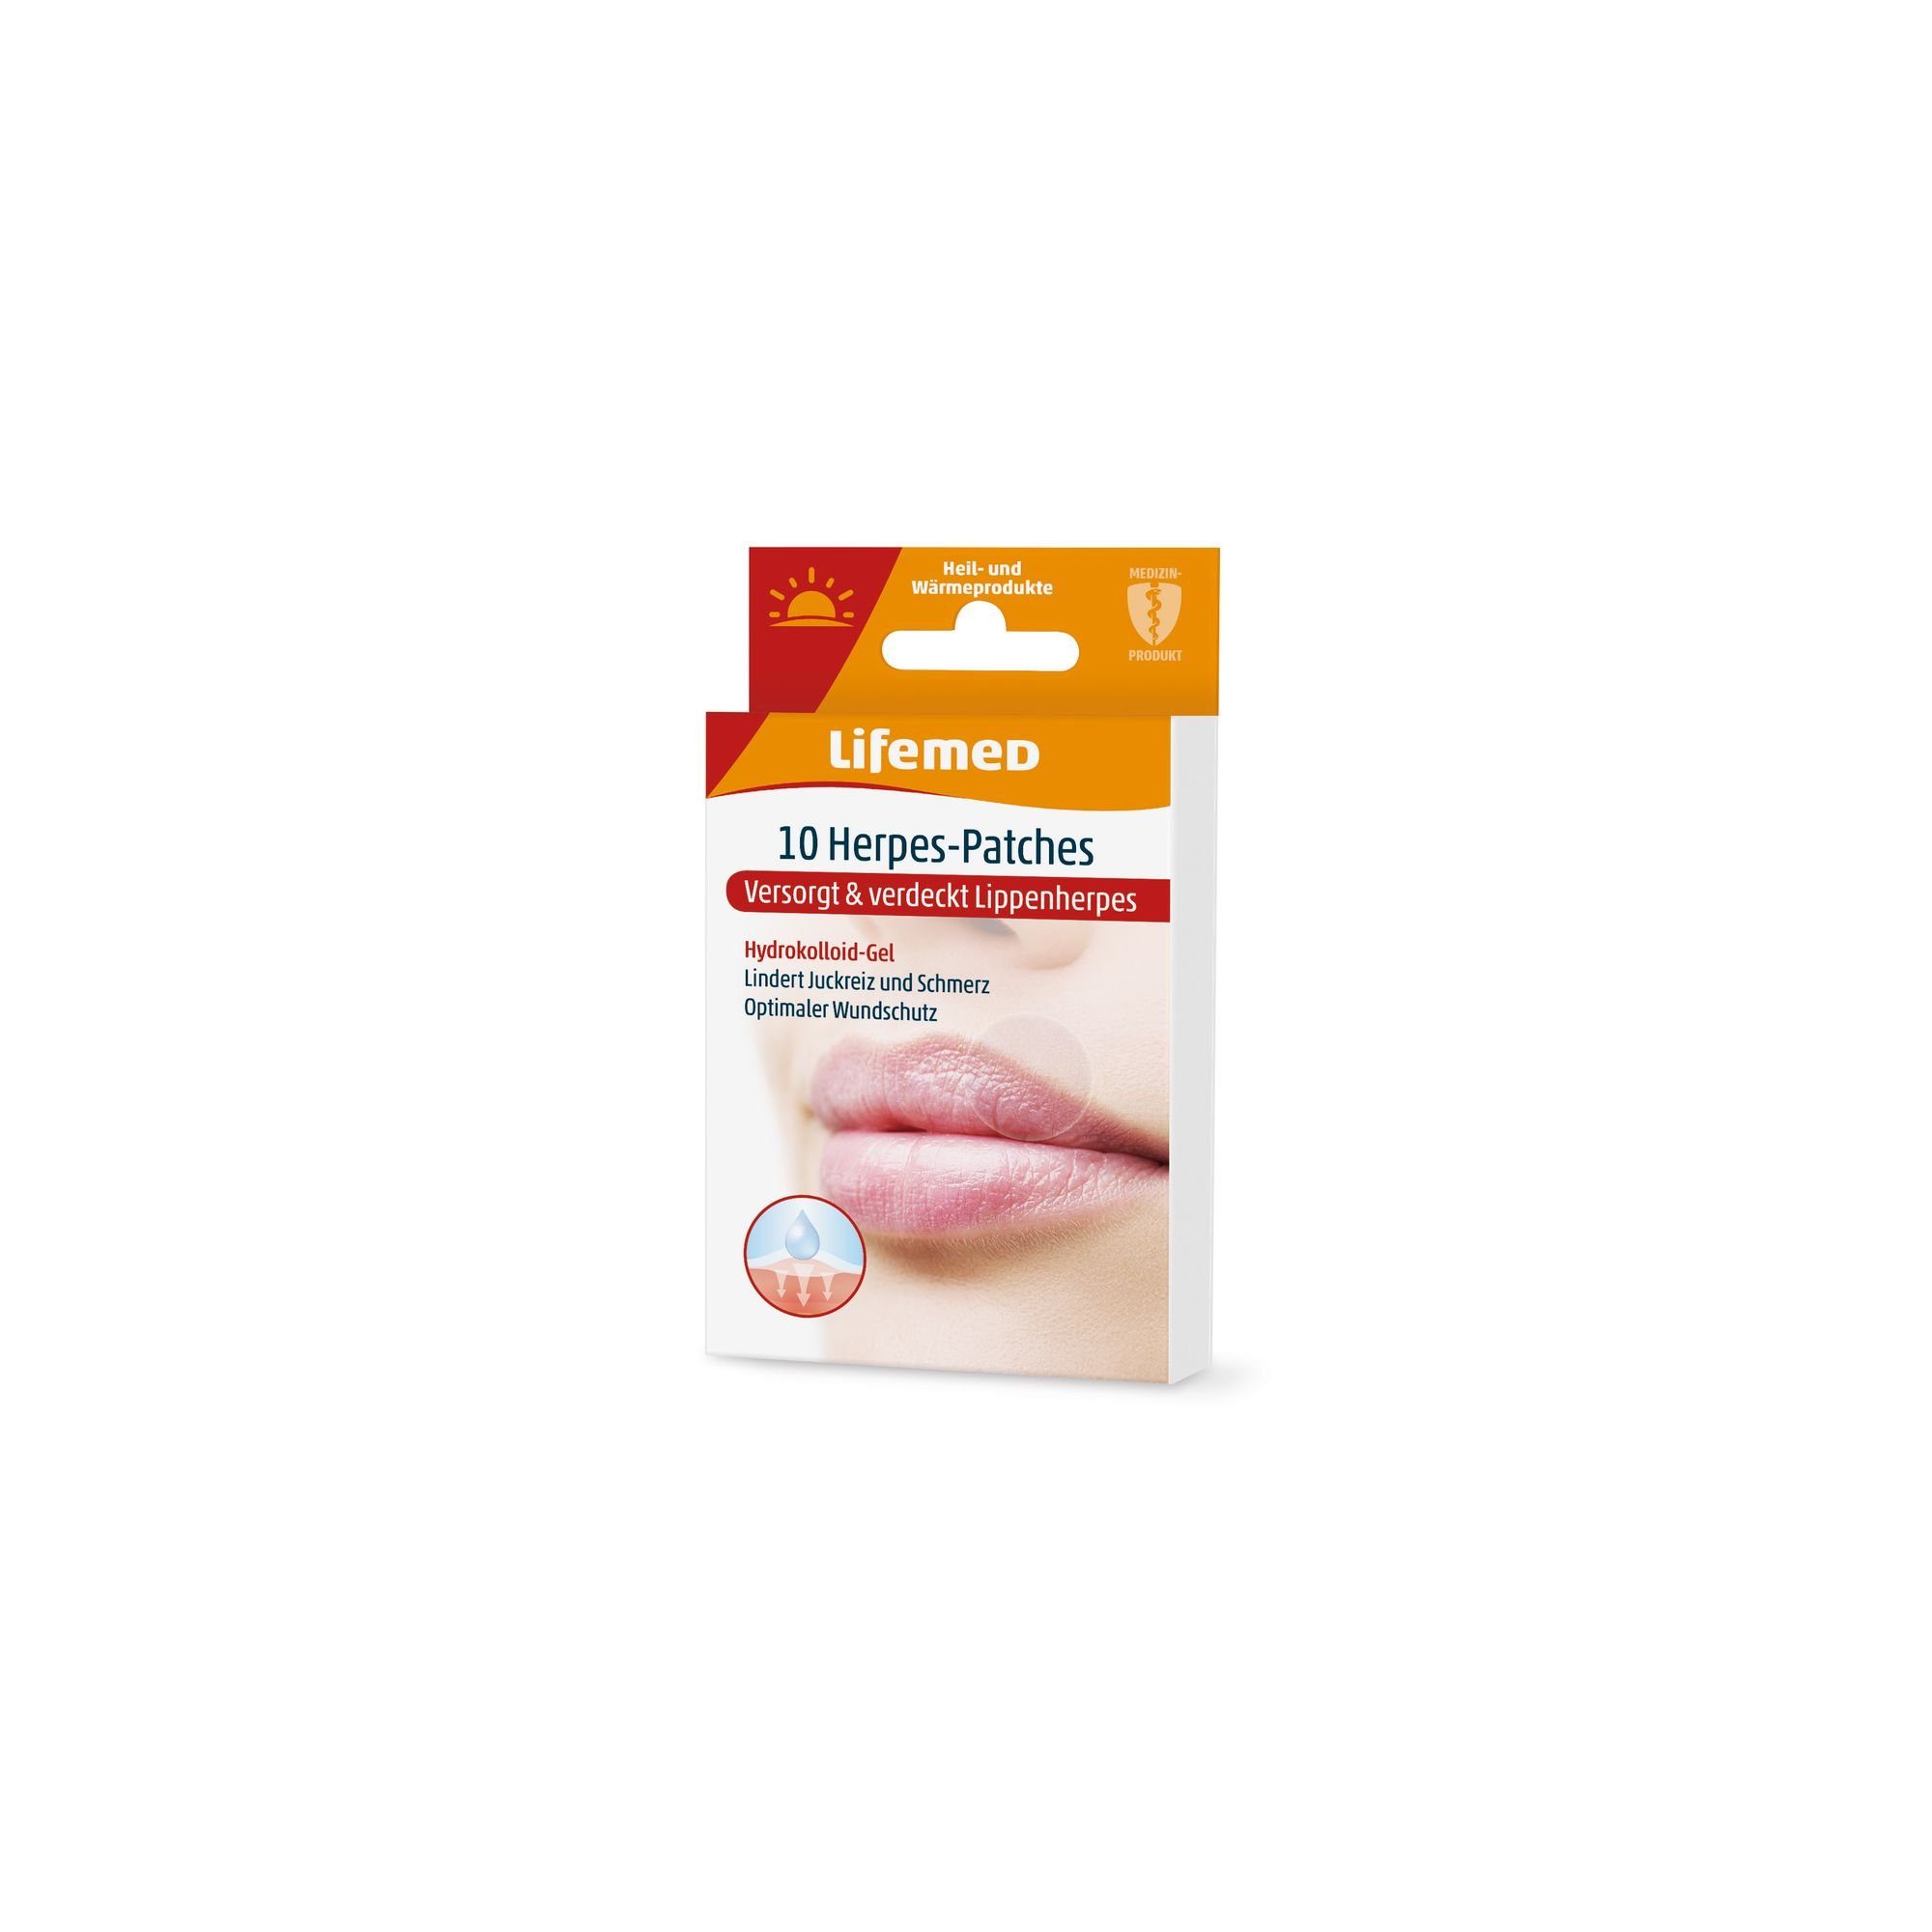 LifeMed Wundpflaster 10 Lifemed Herpes-Patches transparent Latexfrei